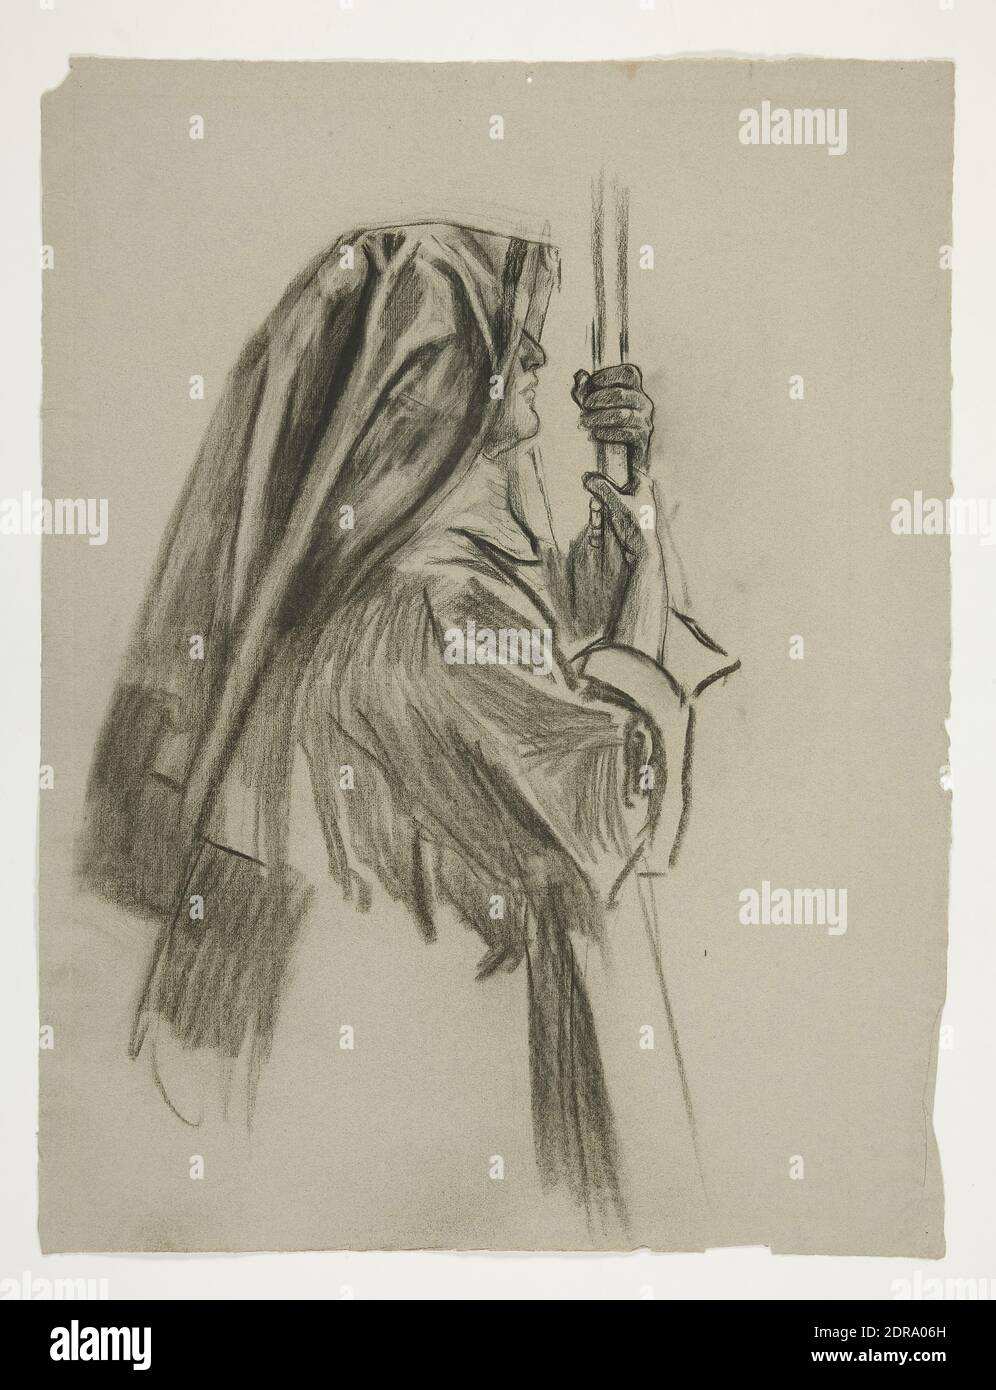 Artist: Edwin Austin Abbey, American, 1852–1911, M.A., 1897, Figure study for the Knighting of Sir Galahad, from The Quest of the Holy Grail (a series of 15 paintings for the Boston Public Library, completed in 1901), Black chalk, Light brown laid, 61.7 × 47 cm (24 5/16 × 18 1/2 in.), Made in United States, American, 19th century, Works on Paper - Drawings and Watercolors Stock Photo